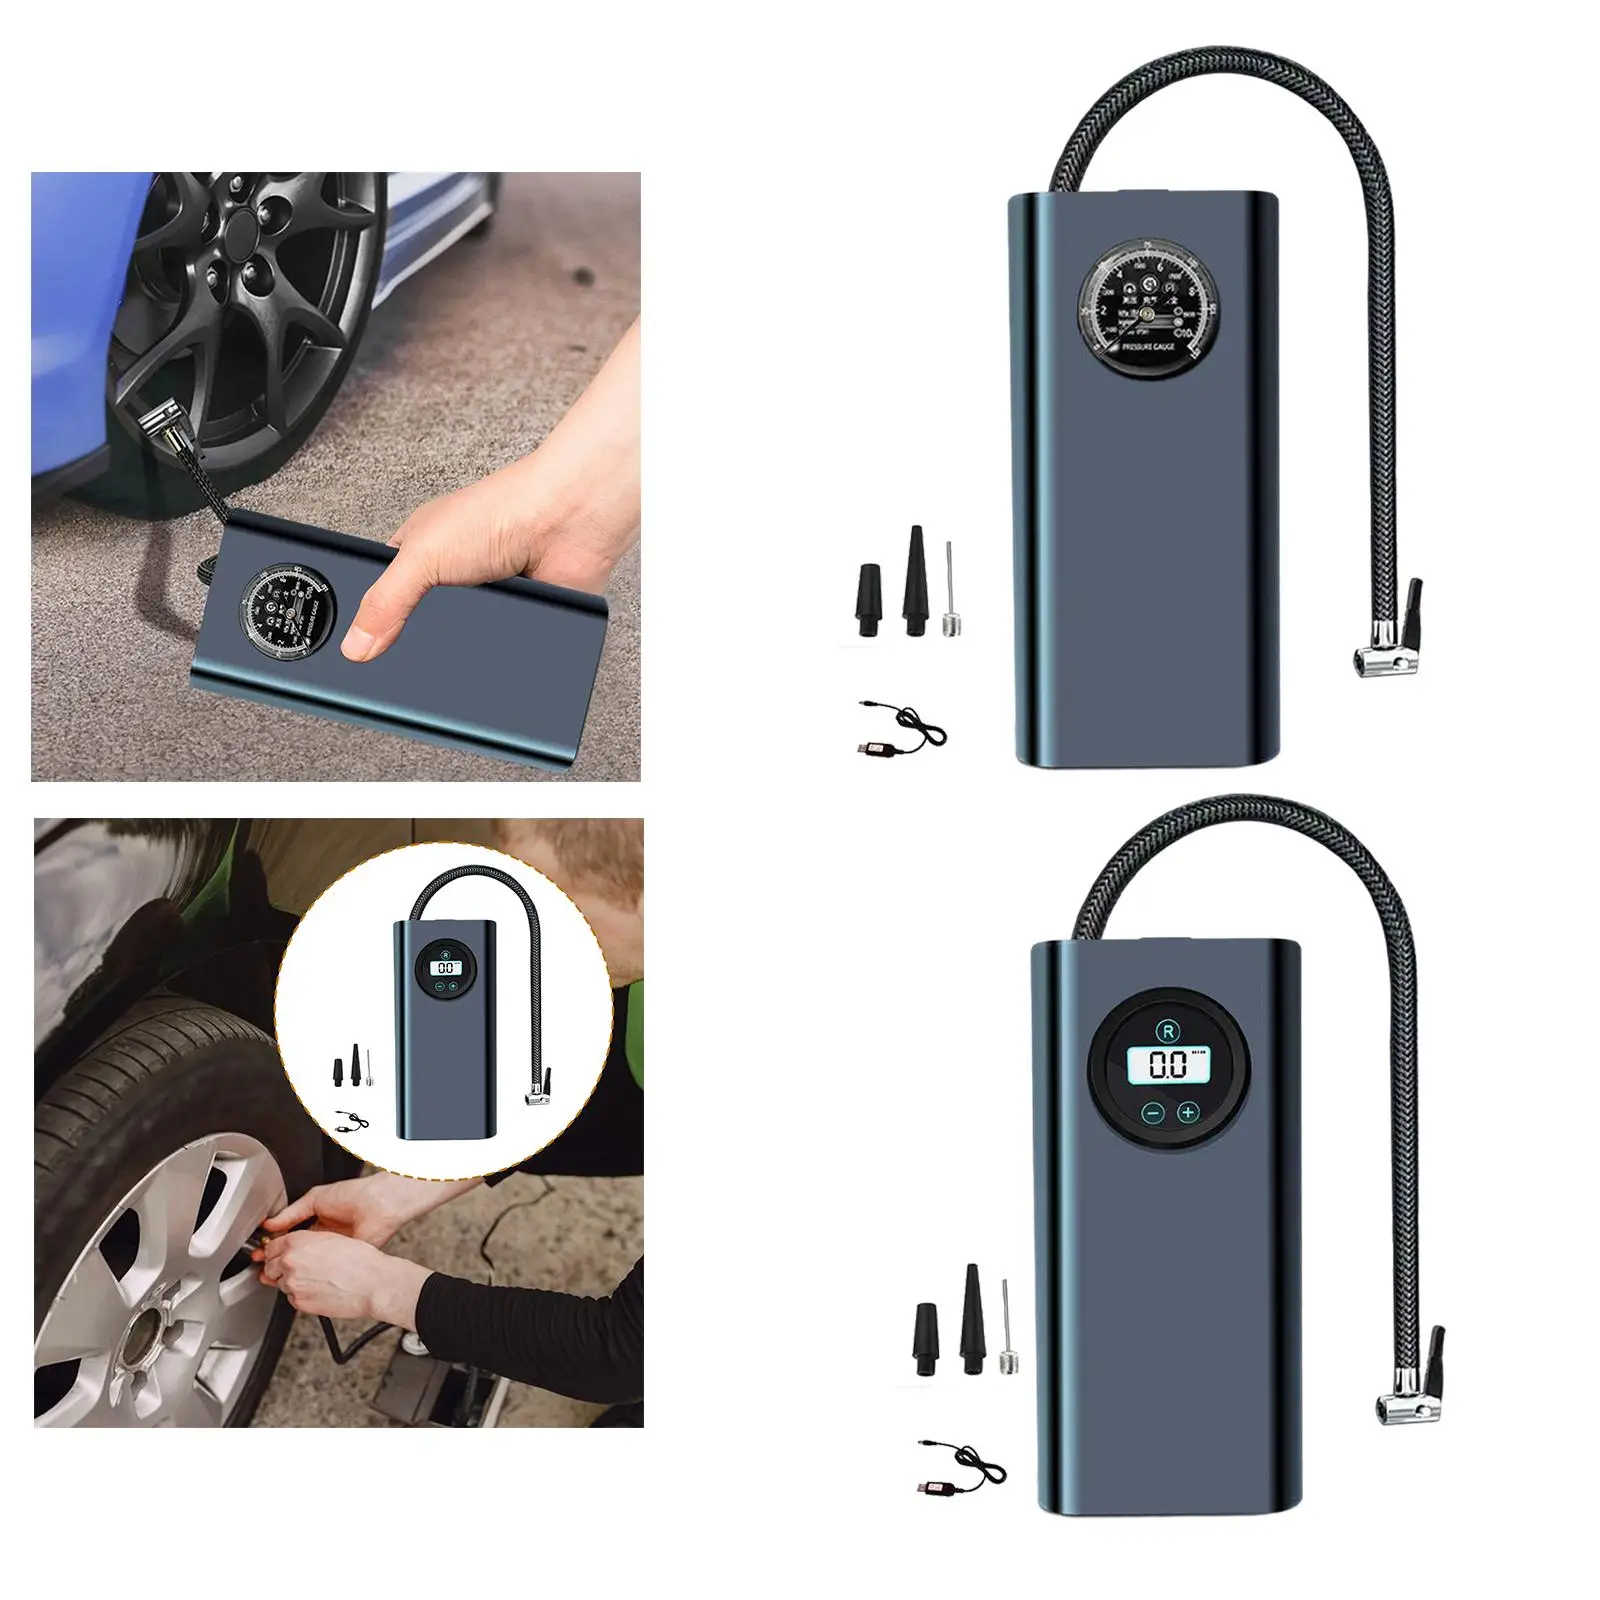 Cordless Tire Inflator Portable Auto Accessories Multipurpose Mini Air Pump Portable Air Compressor for Motorcycle Cars SUV